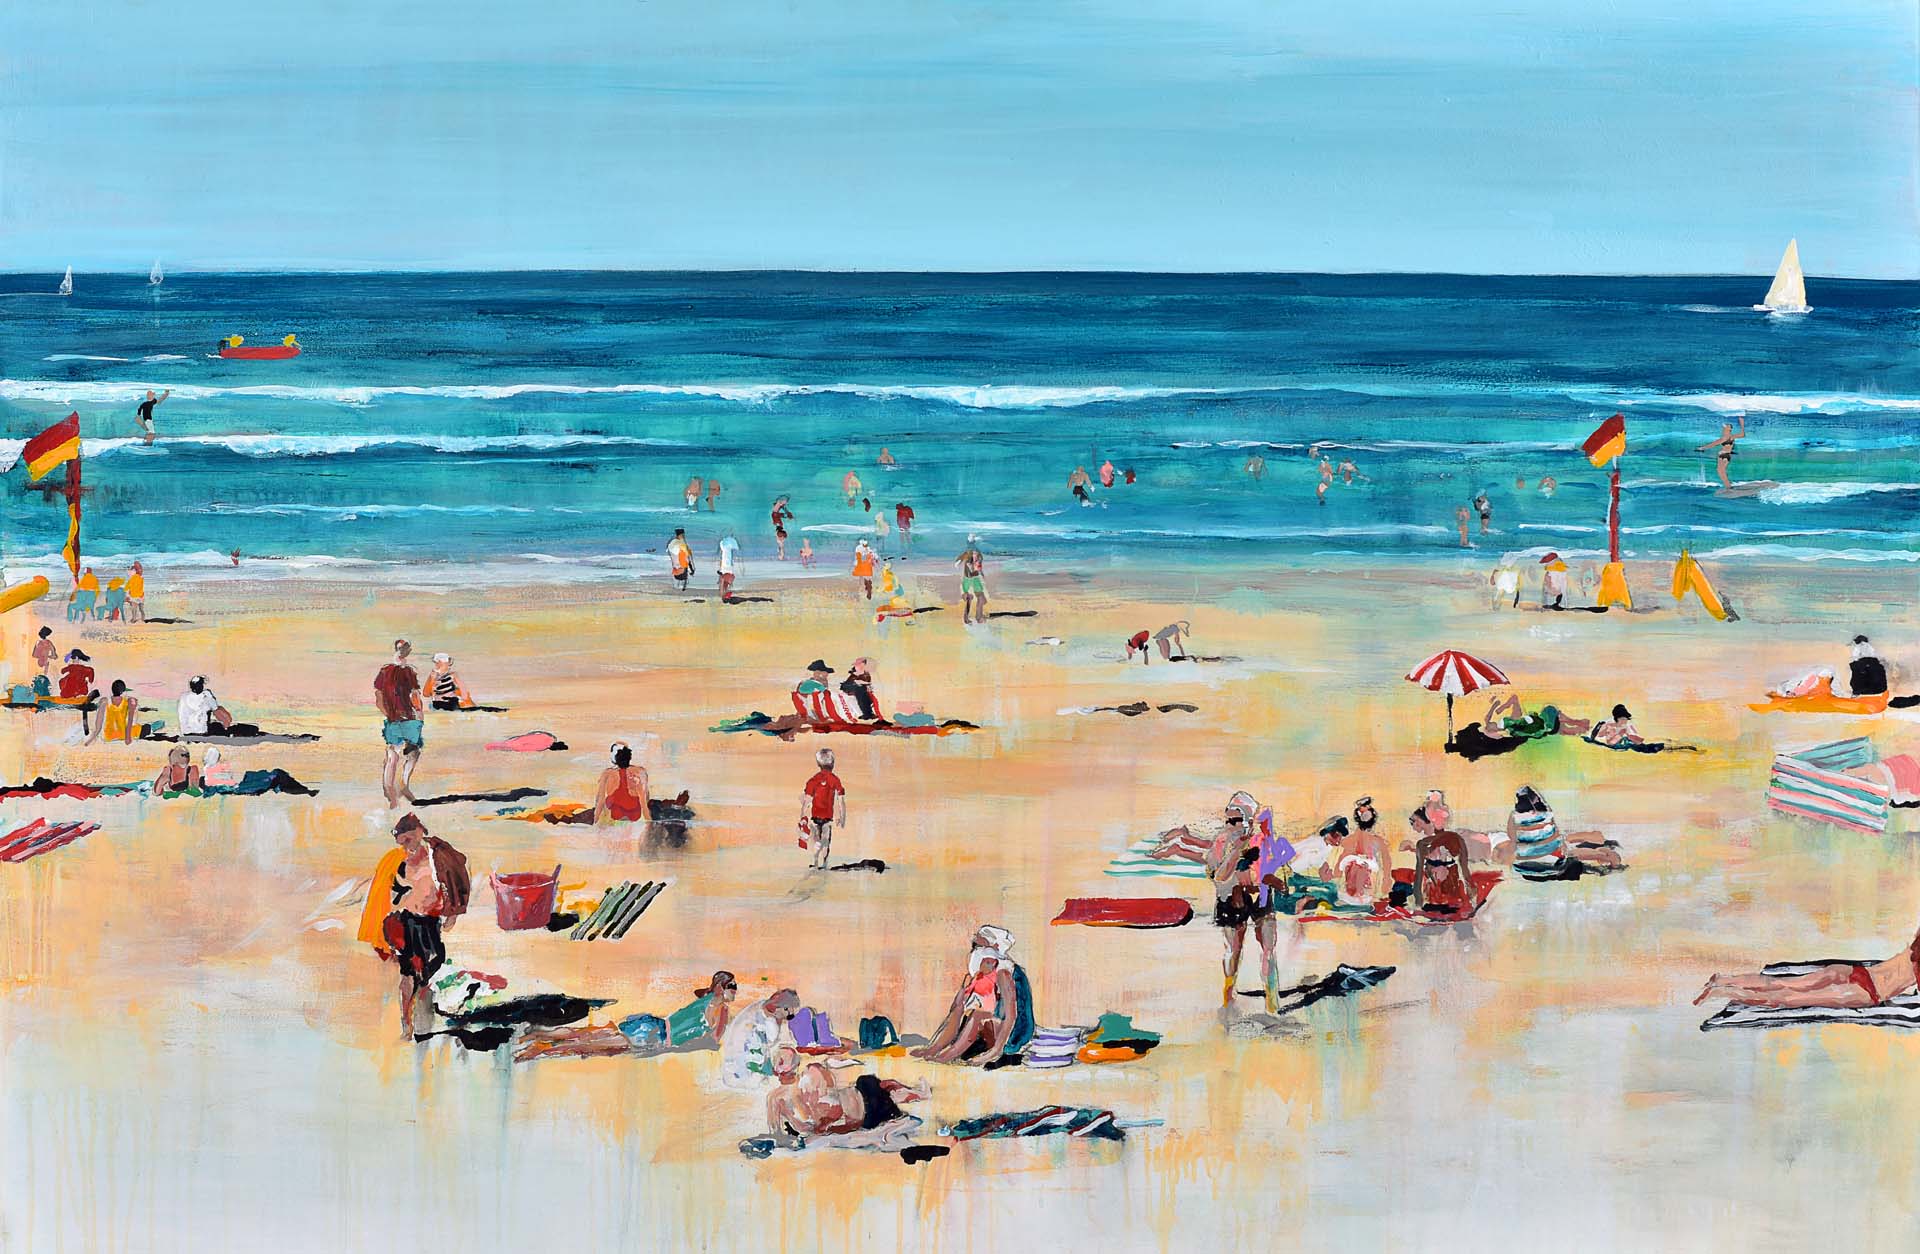 Painting of Oscar on the beach wearing a red rashie and black bathers walking towards the ocean